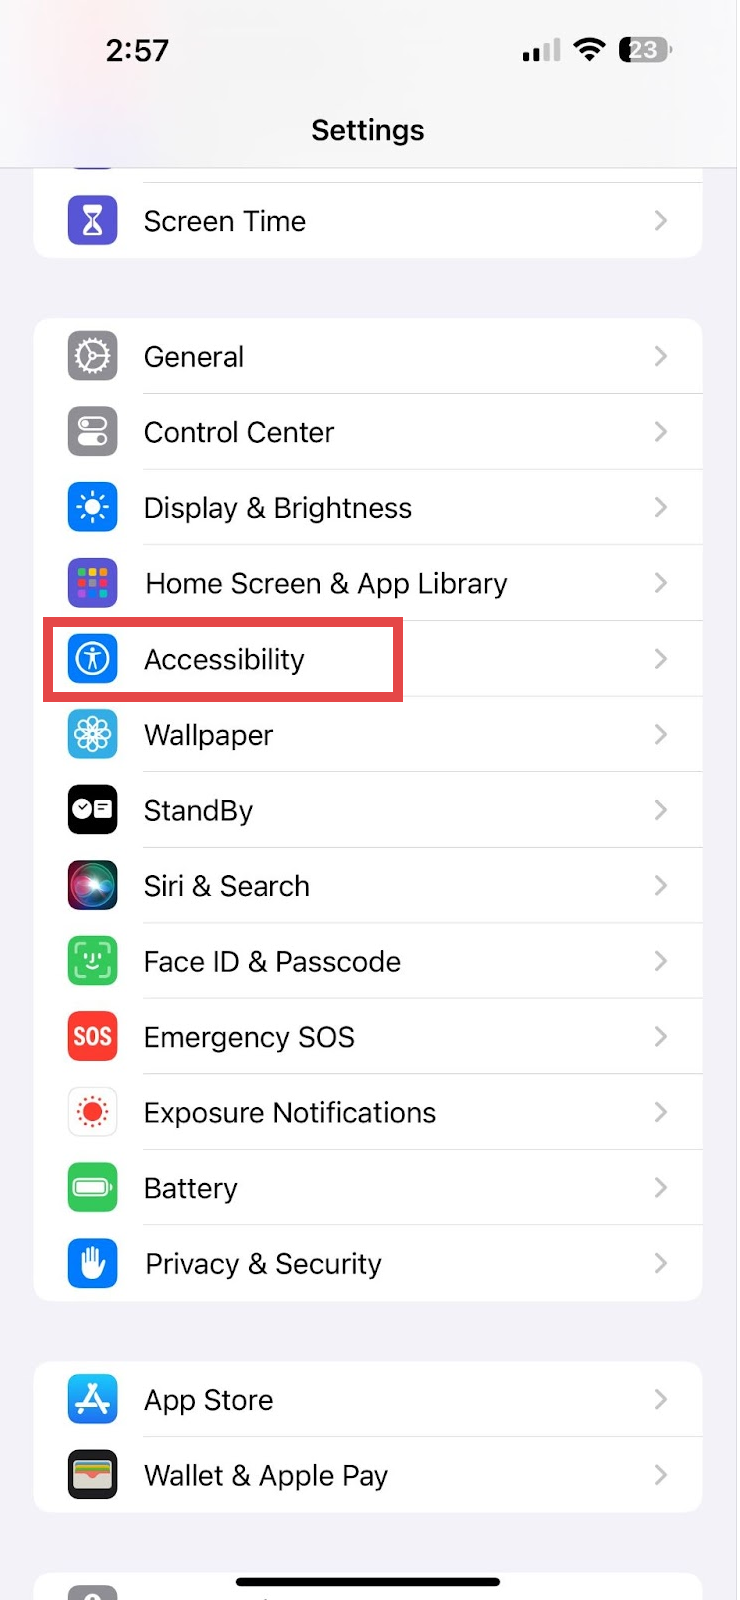 Open Settings, scroll down and select “Accessibility.”